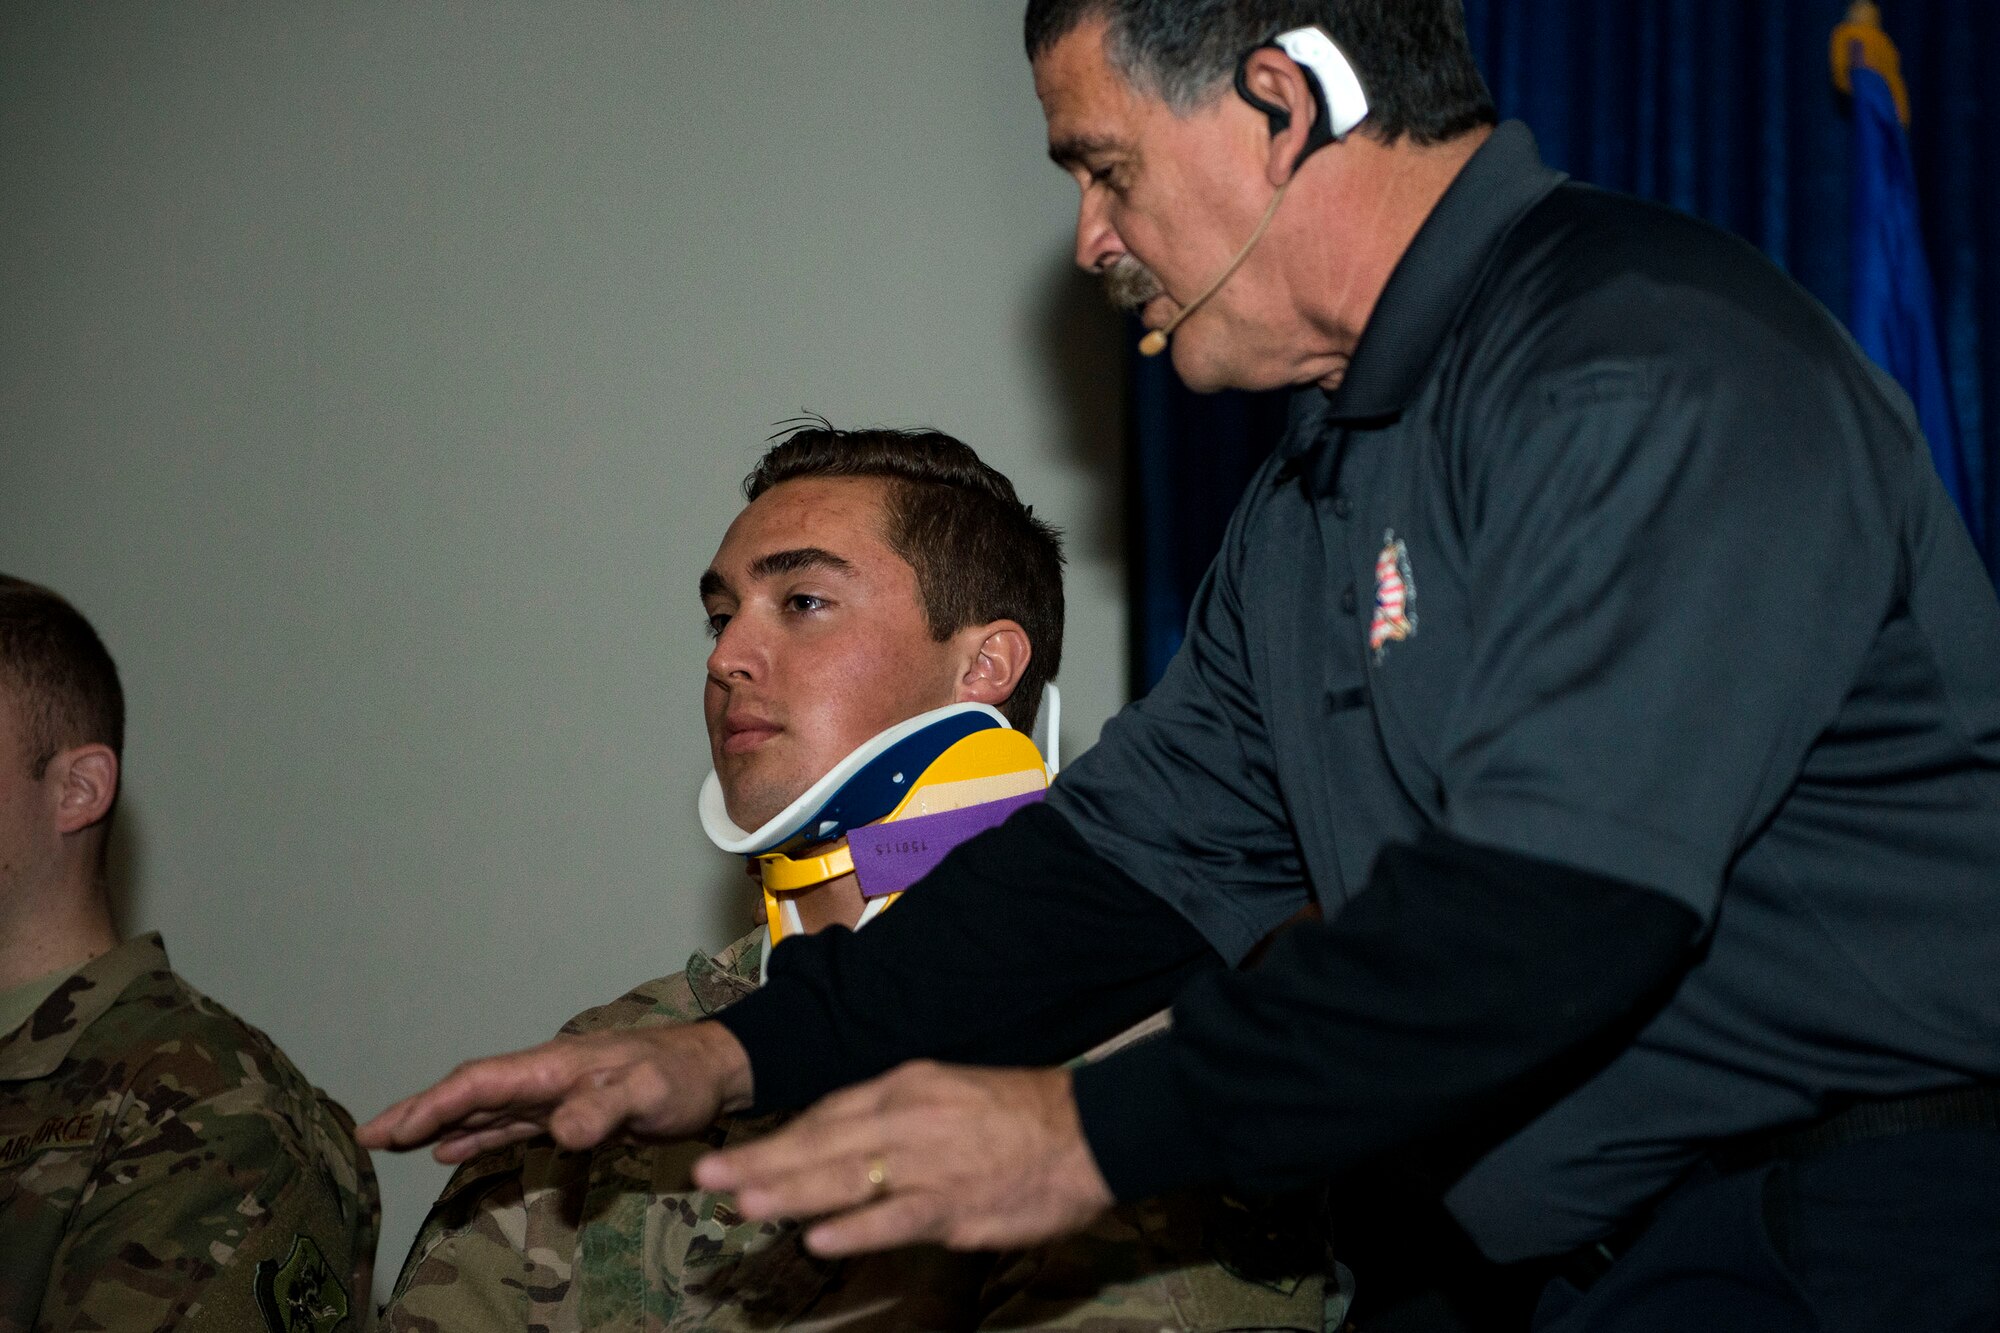 Ronny Garcia, right, safety training coordinator, interacts with Senior Airman Cody Stoltenburg, 71st Rescue Squadron intelligence analyst, during a Street Smart presentation, Jan. 2, 2018, at Moody Air Force Base, Ga. The presenters utilized Airmen to simulate the potential results of drunk driving. Street Smart is a safety program designed to emphasize the dangers of making poor decisions and then driving a vehicle. (U.S. Air Force photo by Airman 1st Class Erick Requadt)